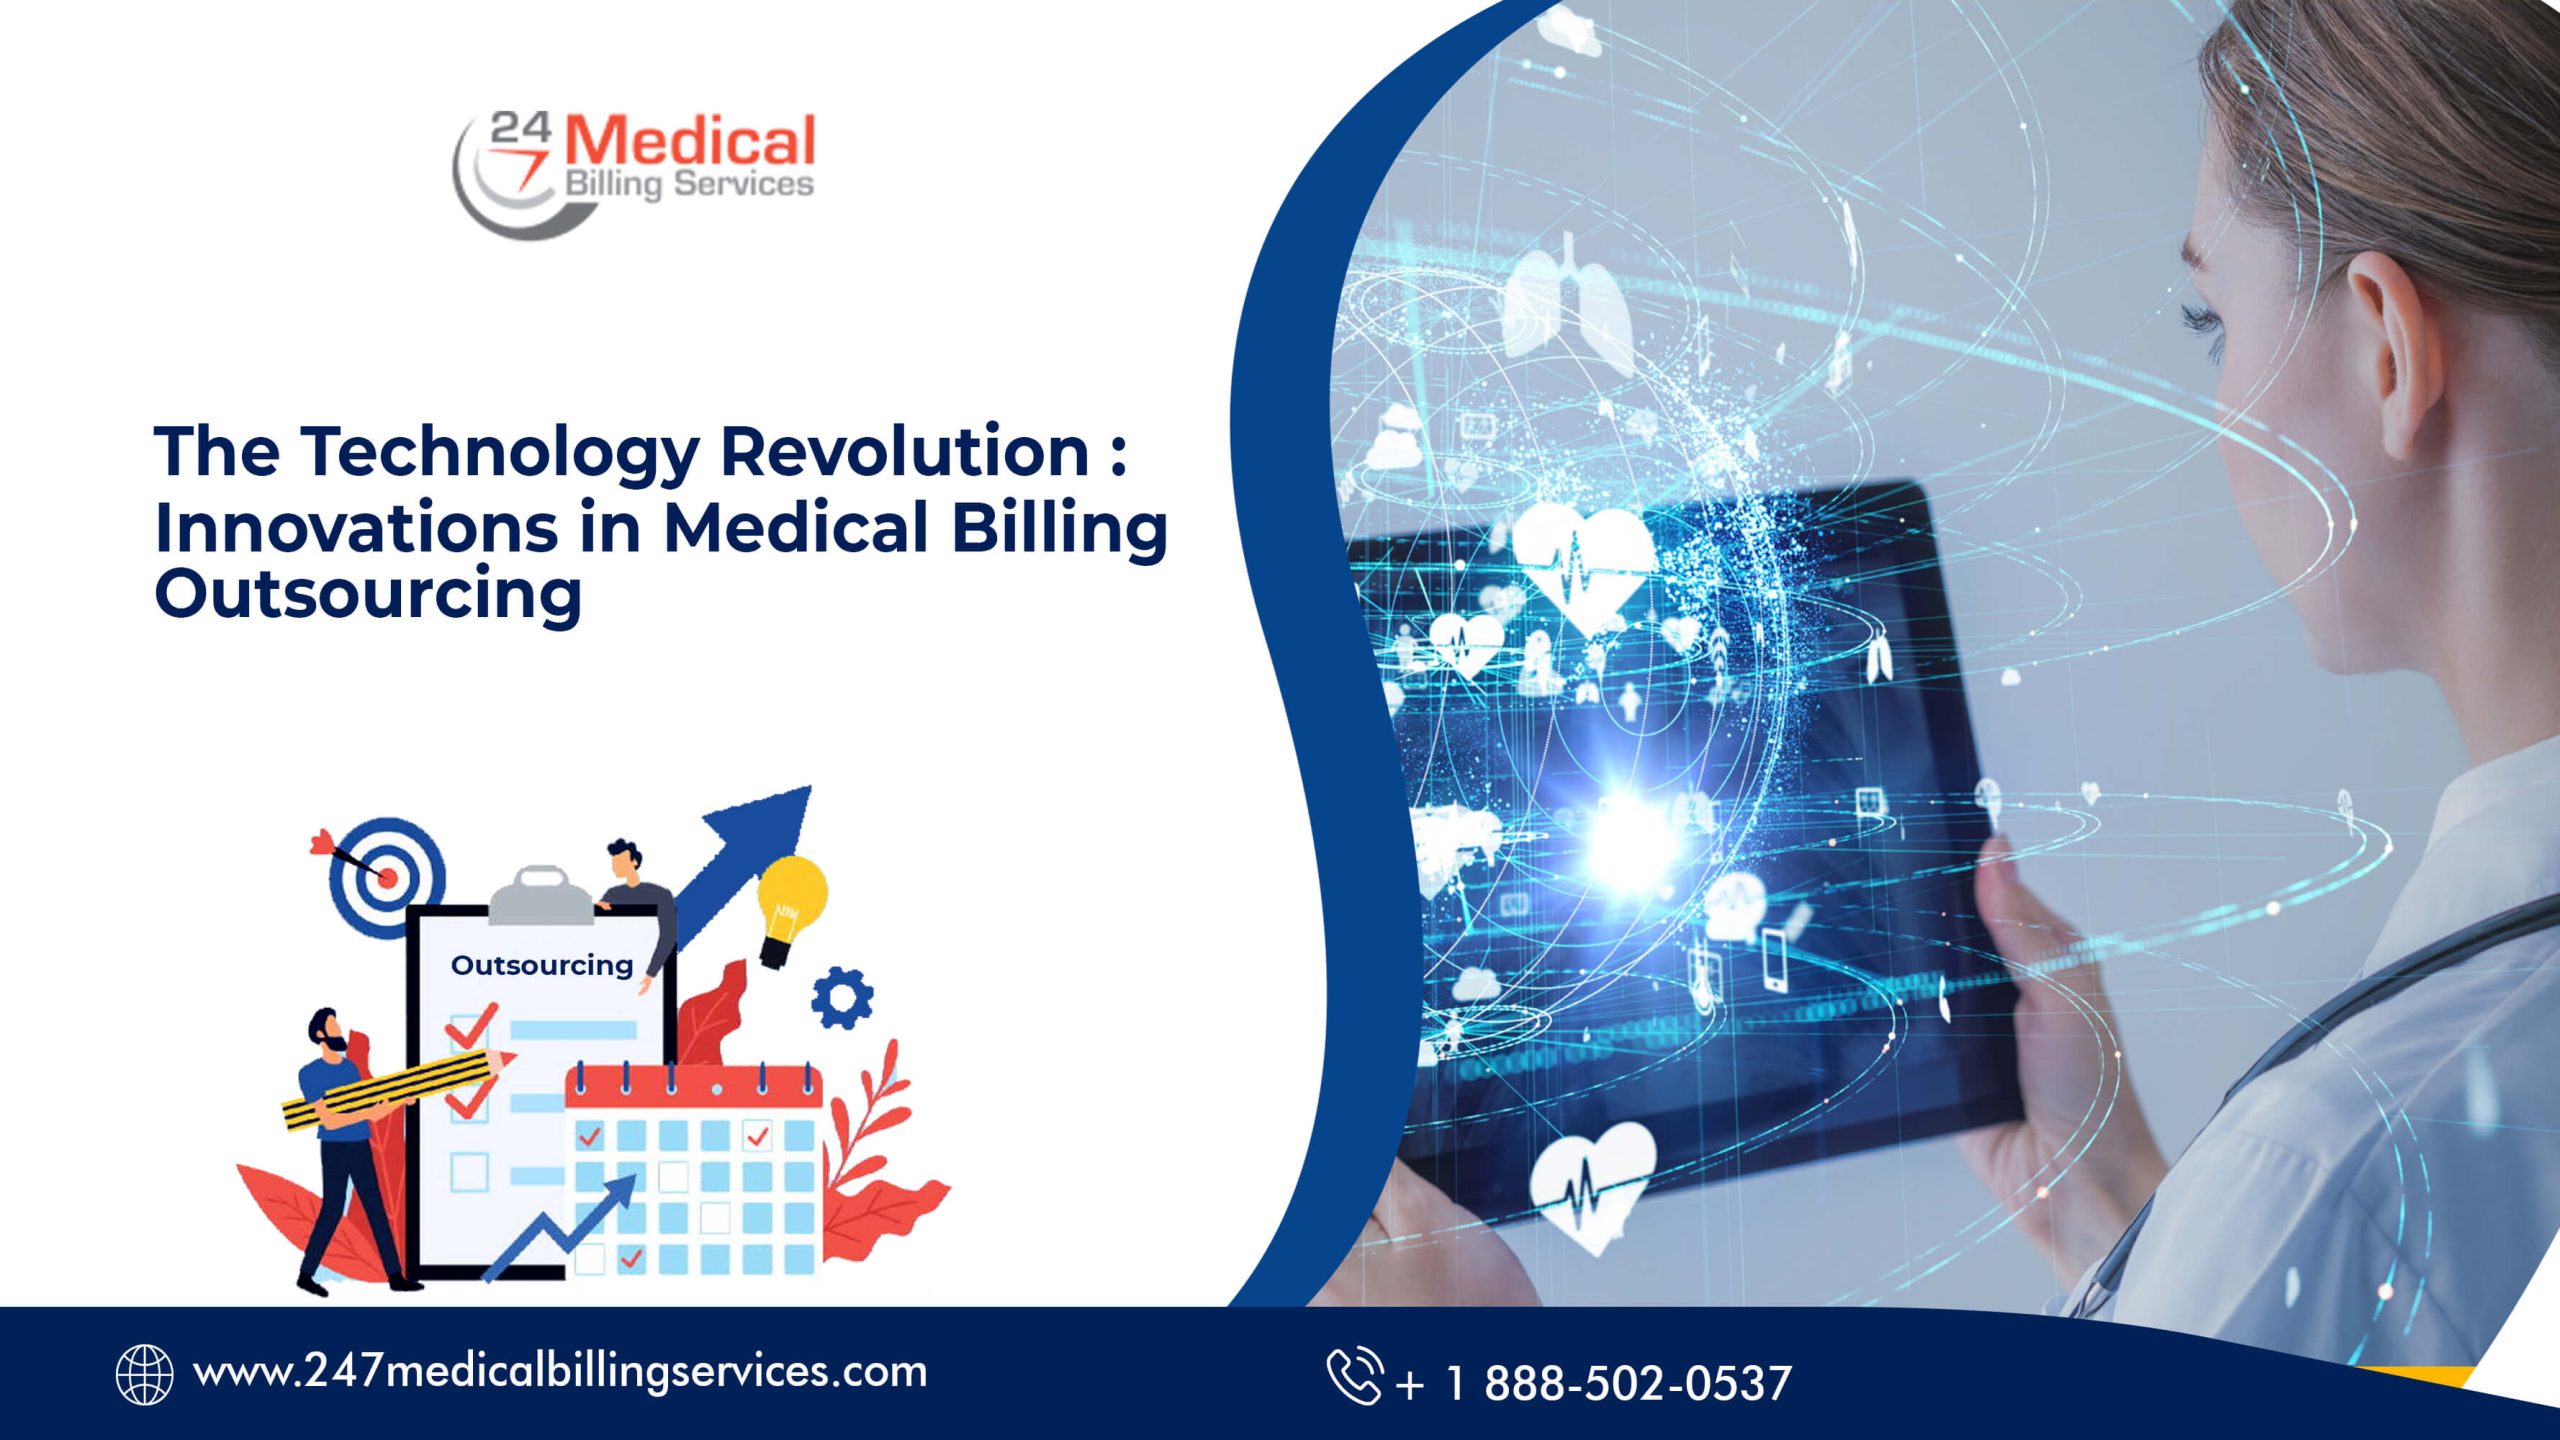 The Technology Revolution Innovations in Medical Billing Outsourcing scaled